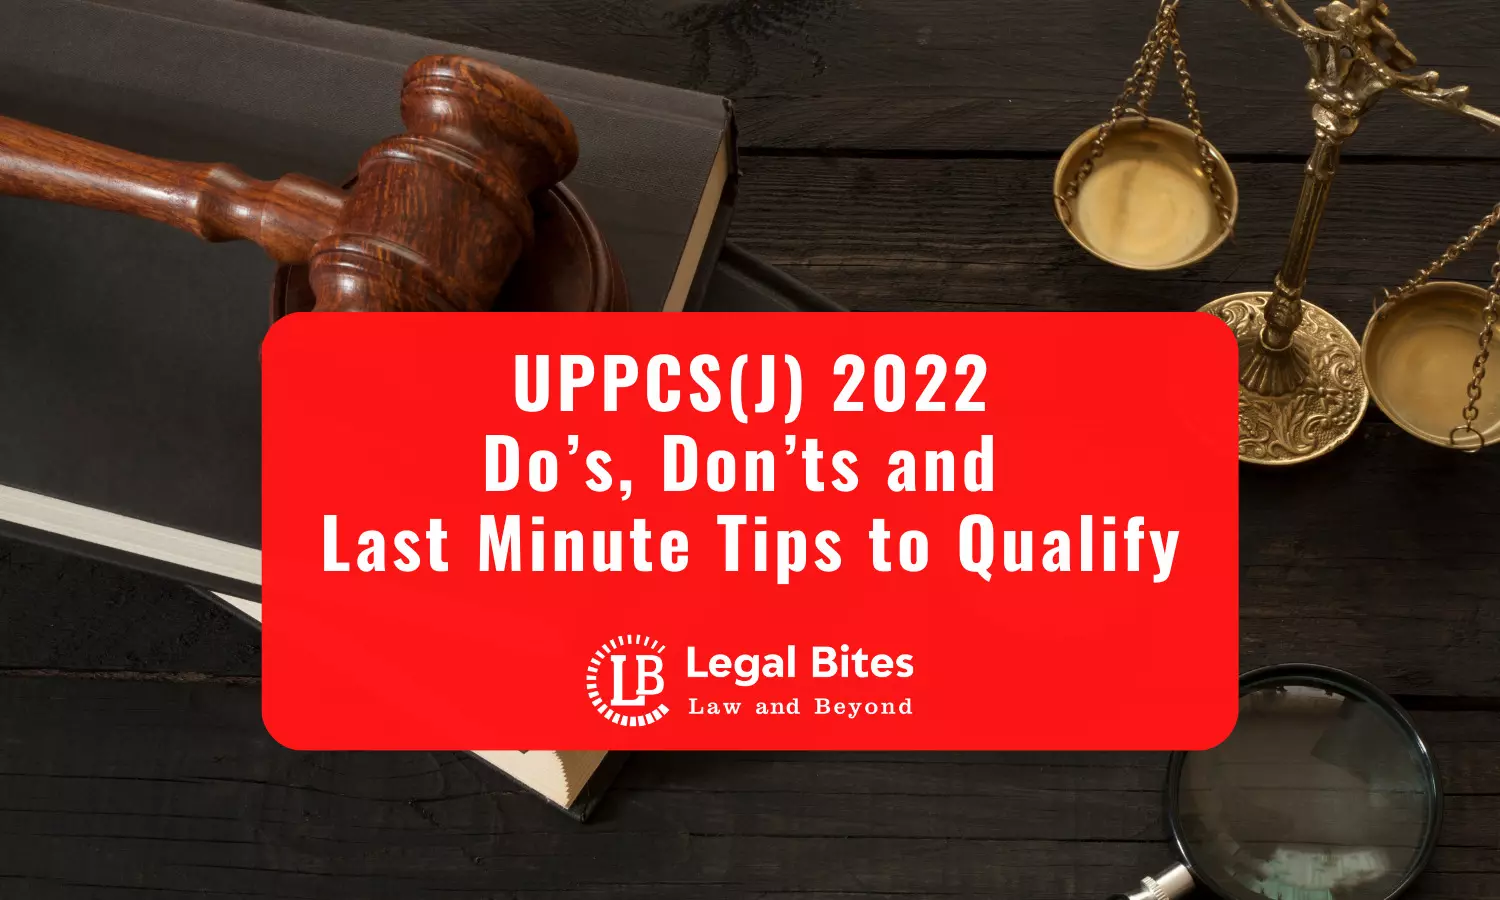 UPPCS(J) 2022: Do’s, Don’ts and Last-Minute Tips to Qualify